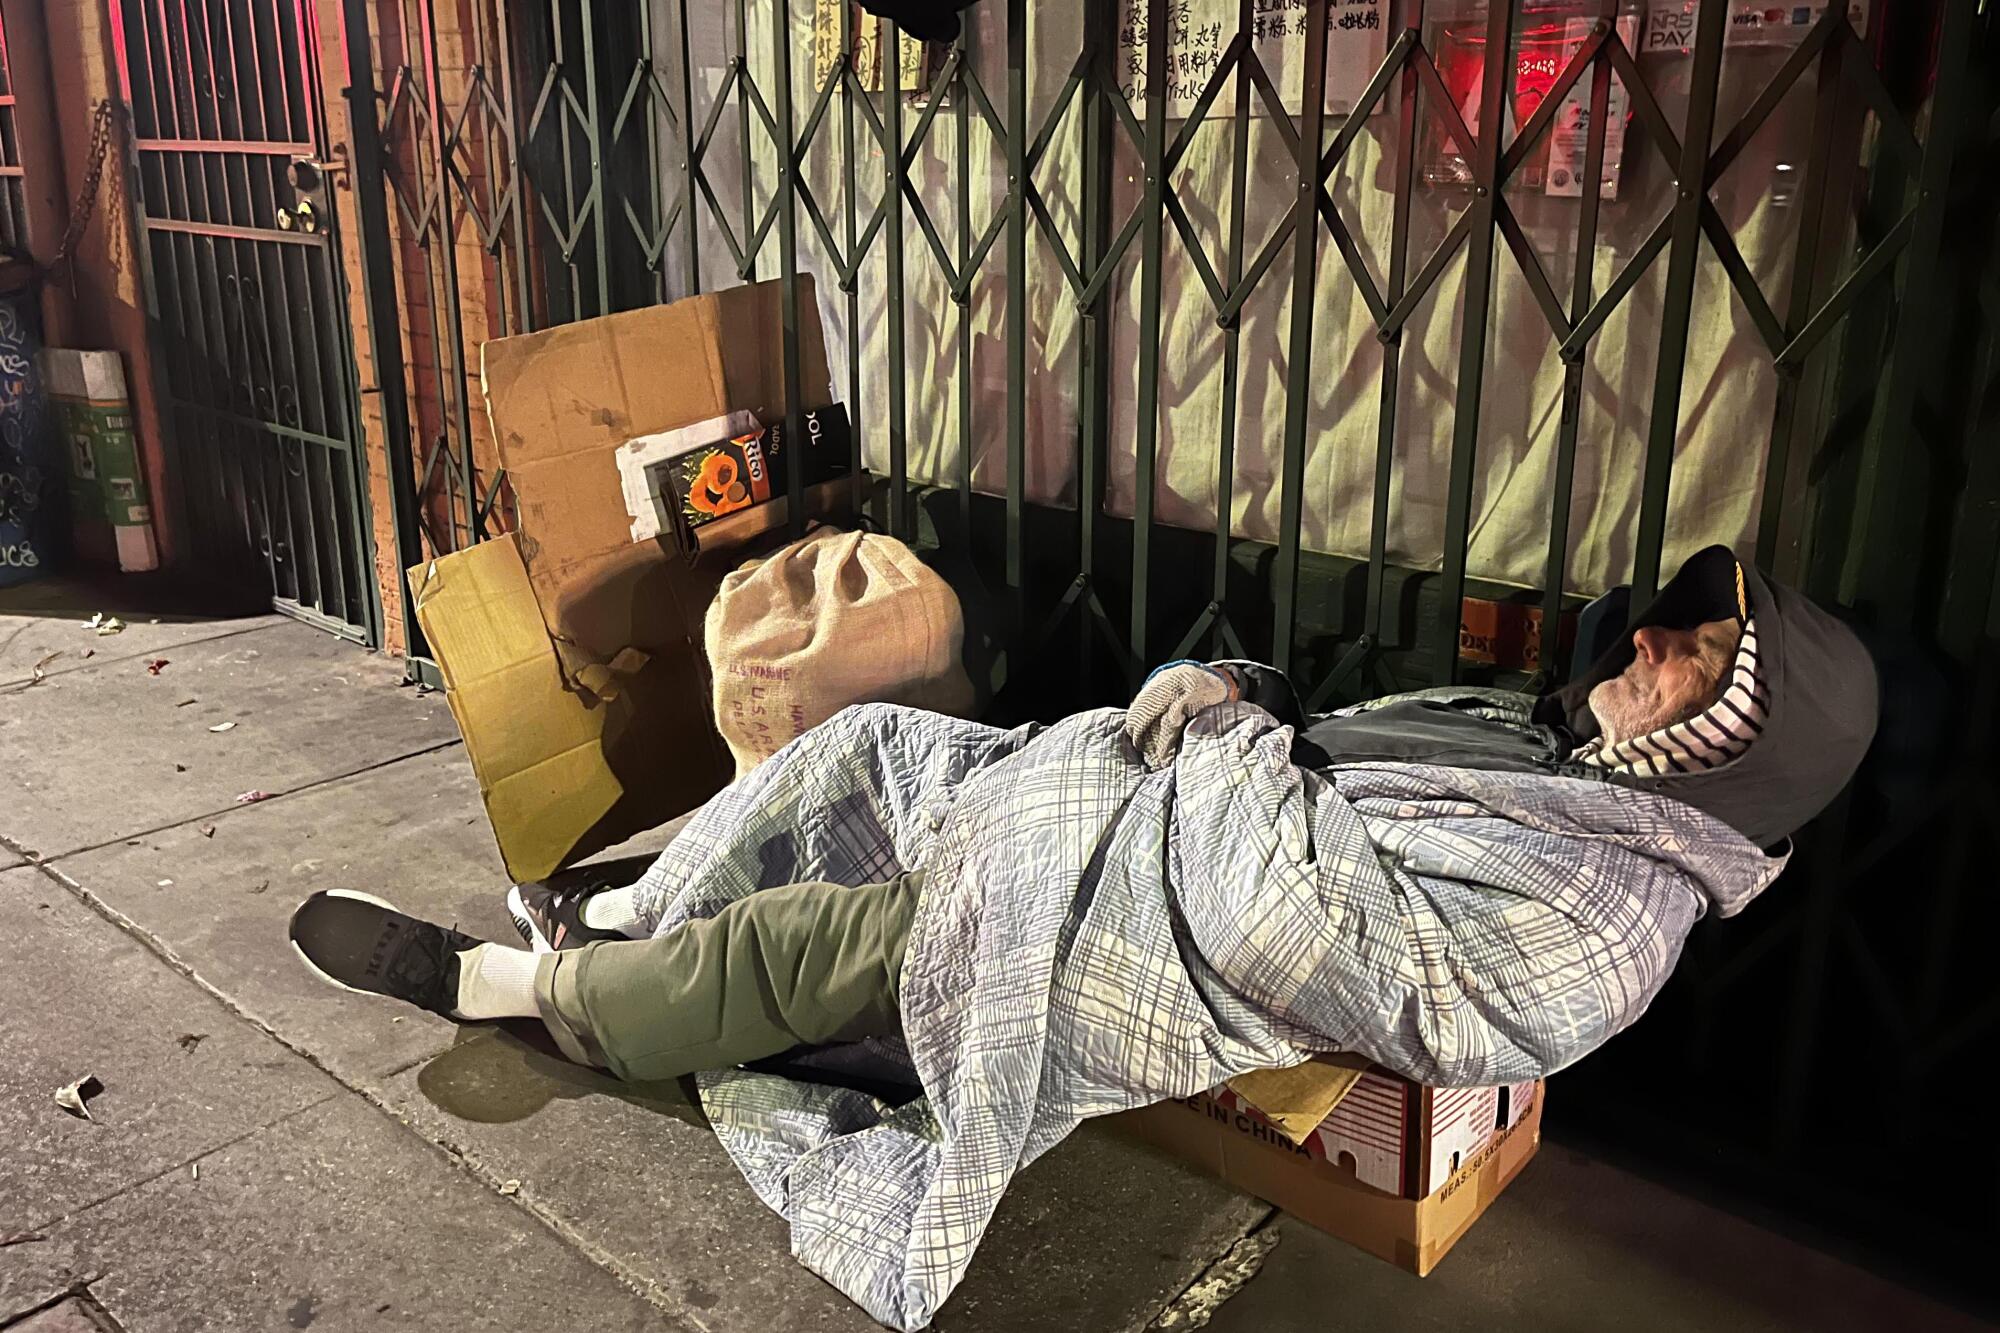 A person sleeps on a cardboard bed on a sidewalk near the gated and locked entry of a business. 